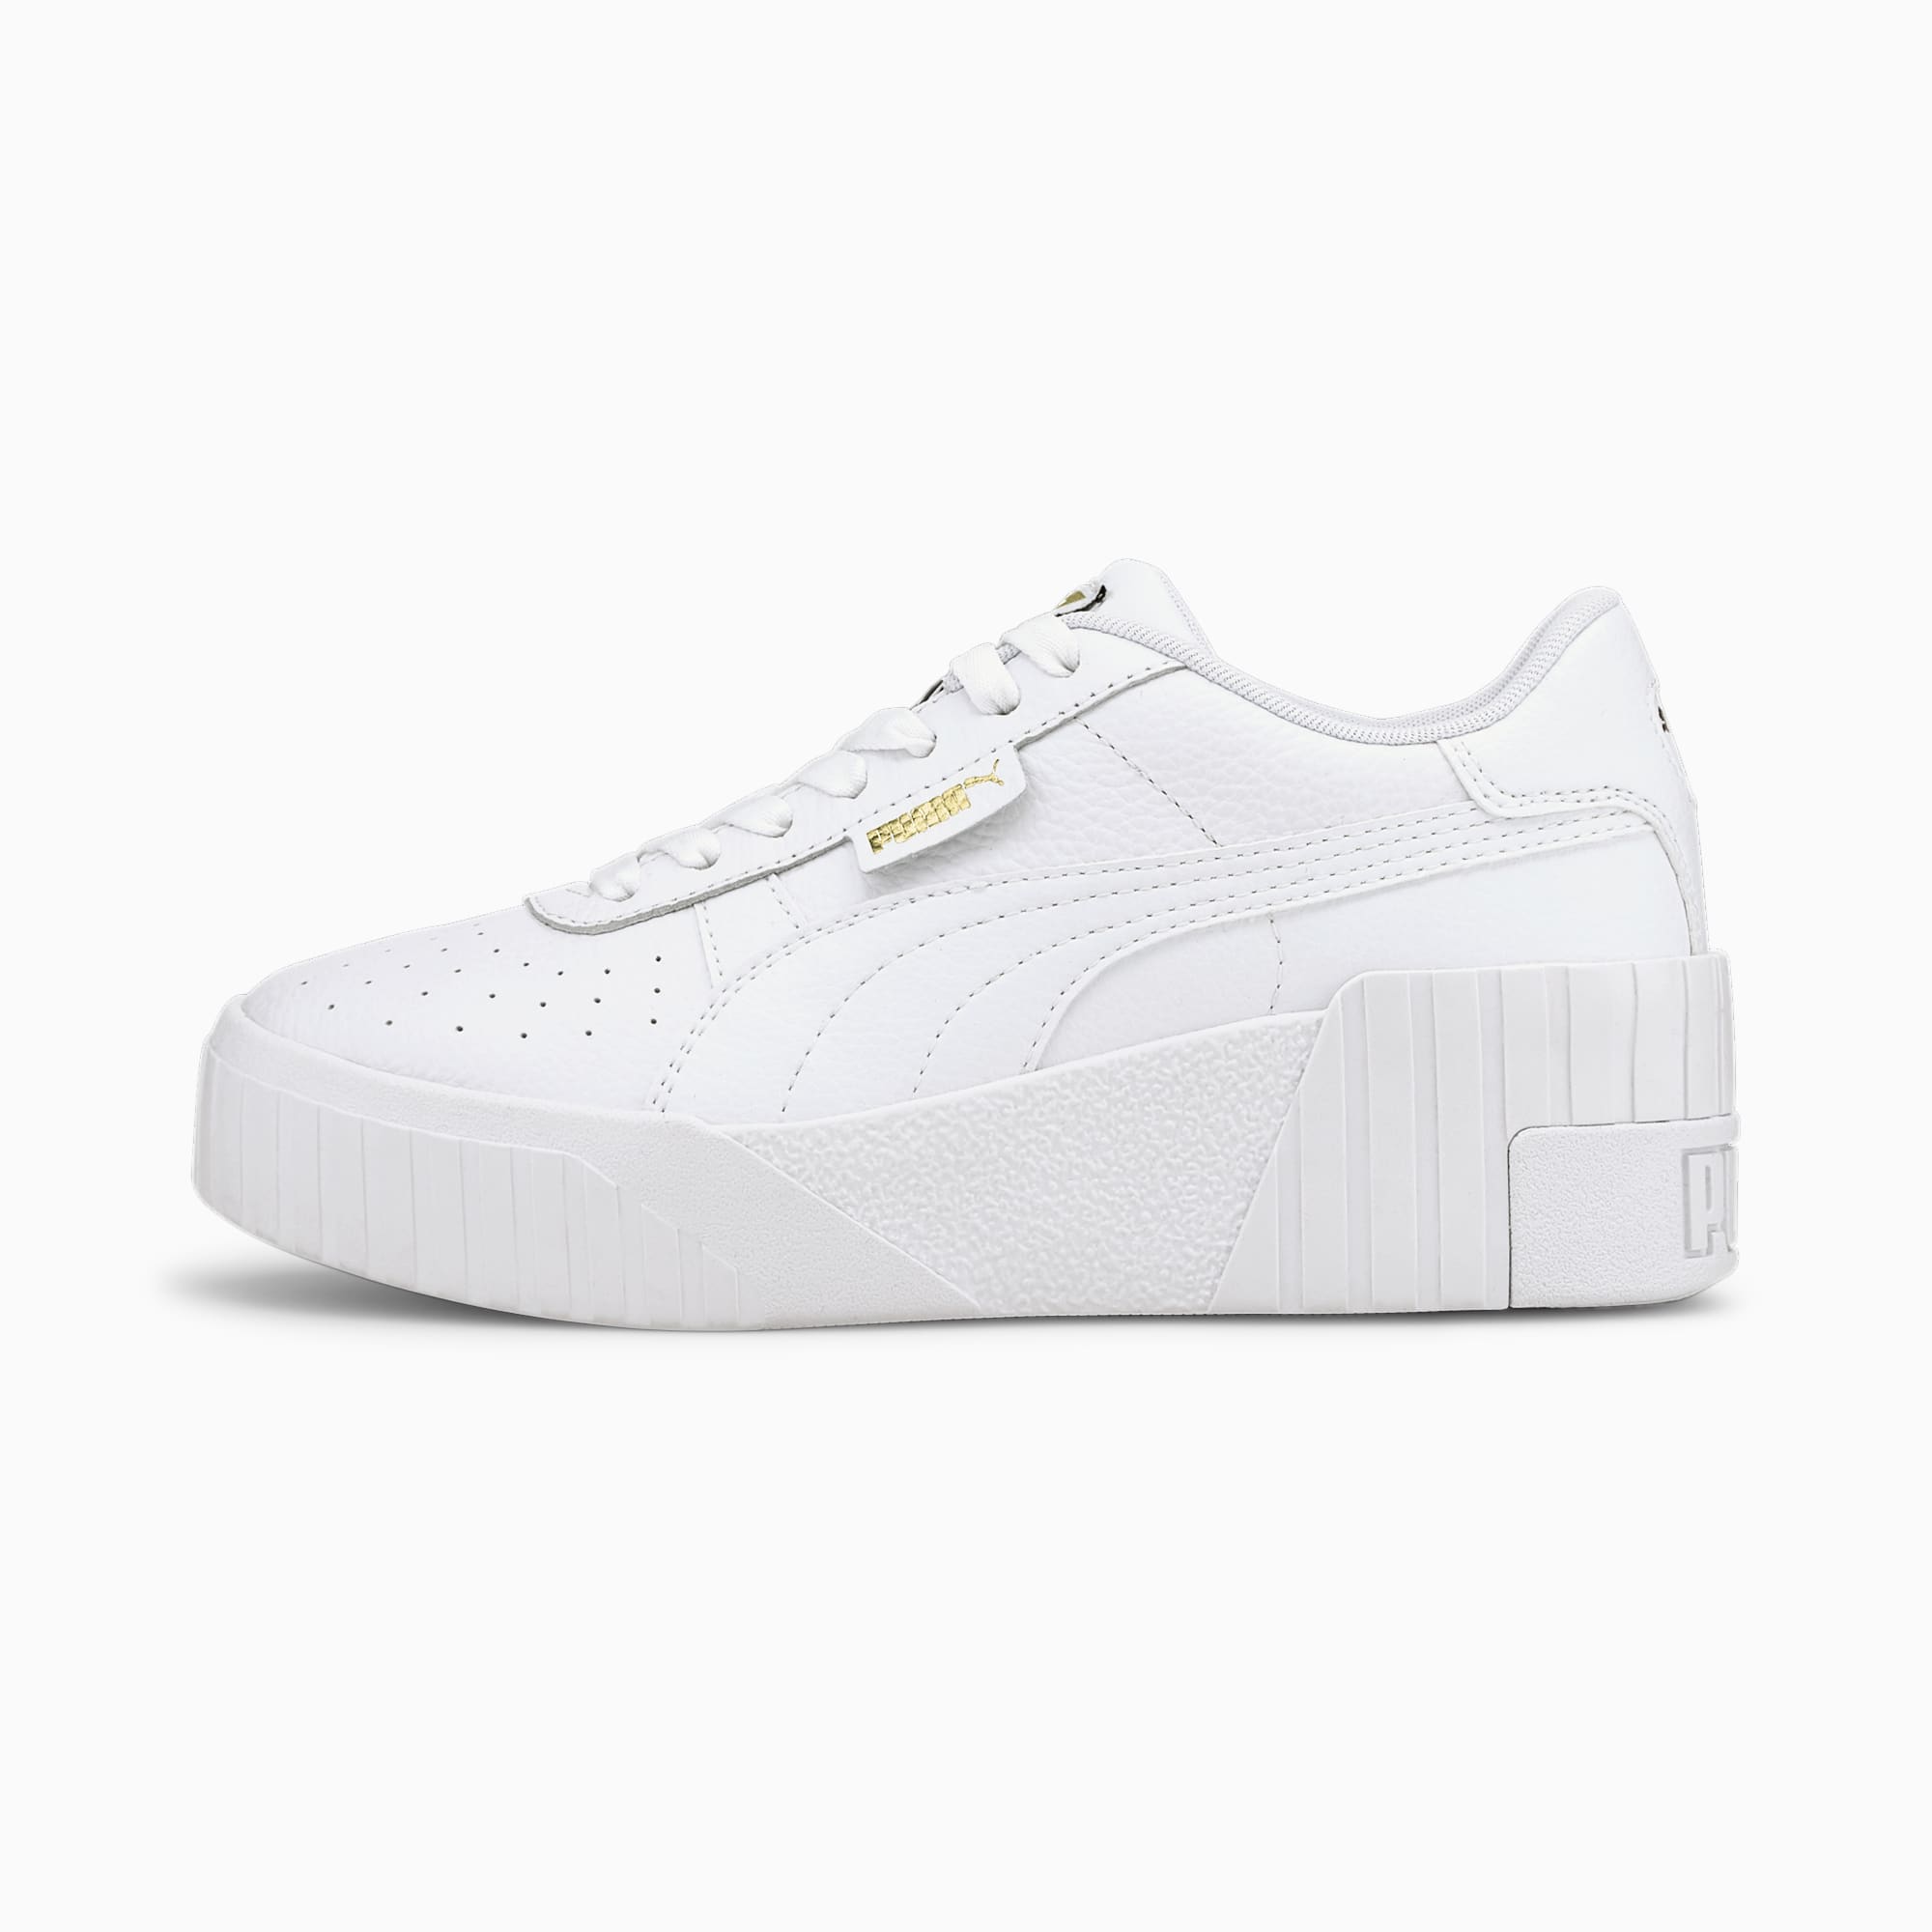 PUMA Chaussure Basket Cali Wedge pour Femme, Blanc, Taille 38, Chaussures